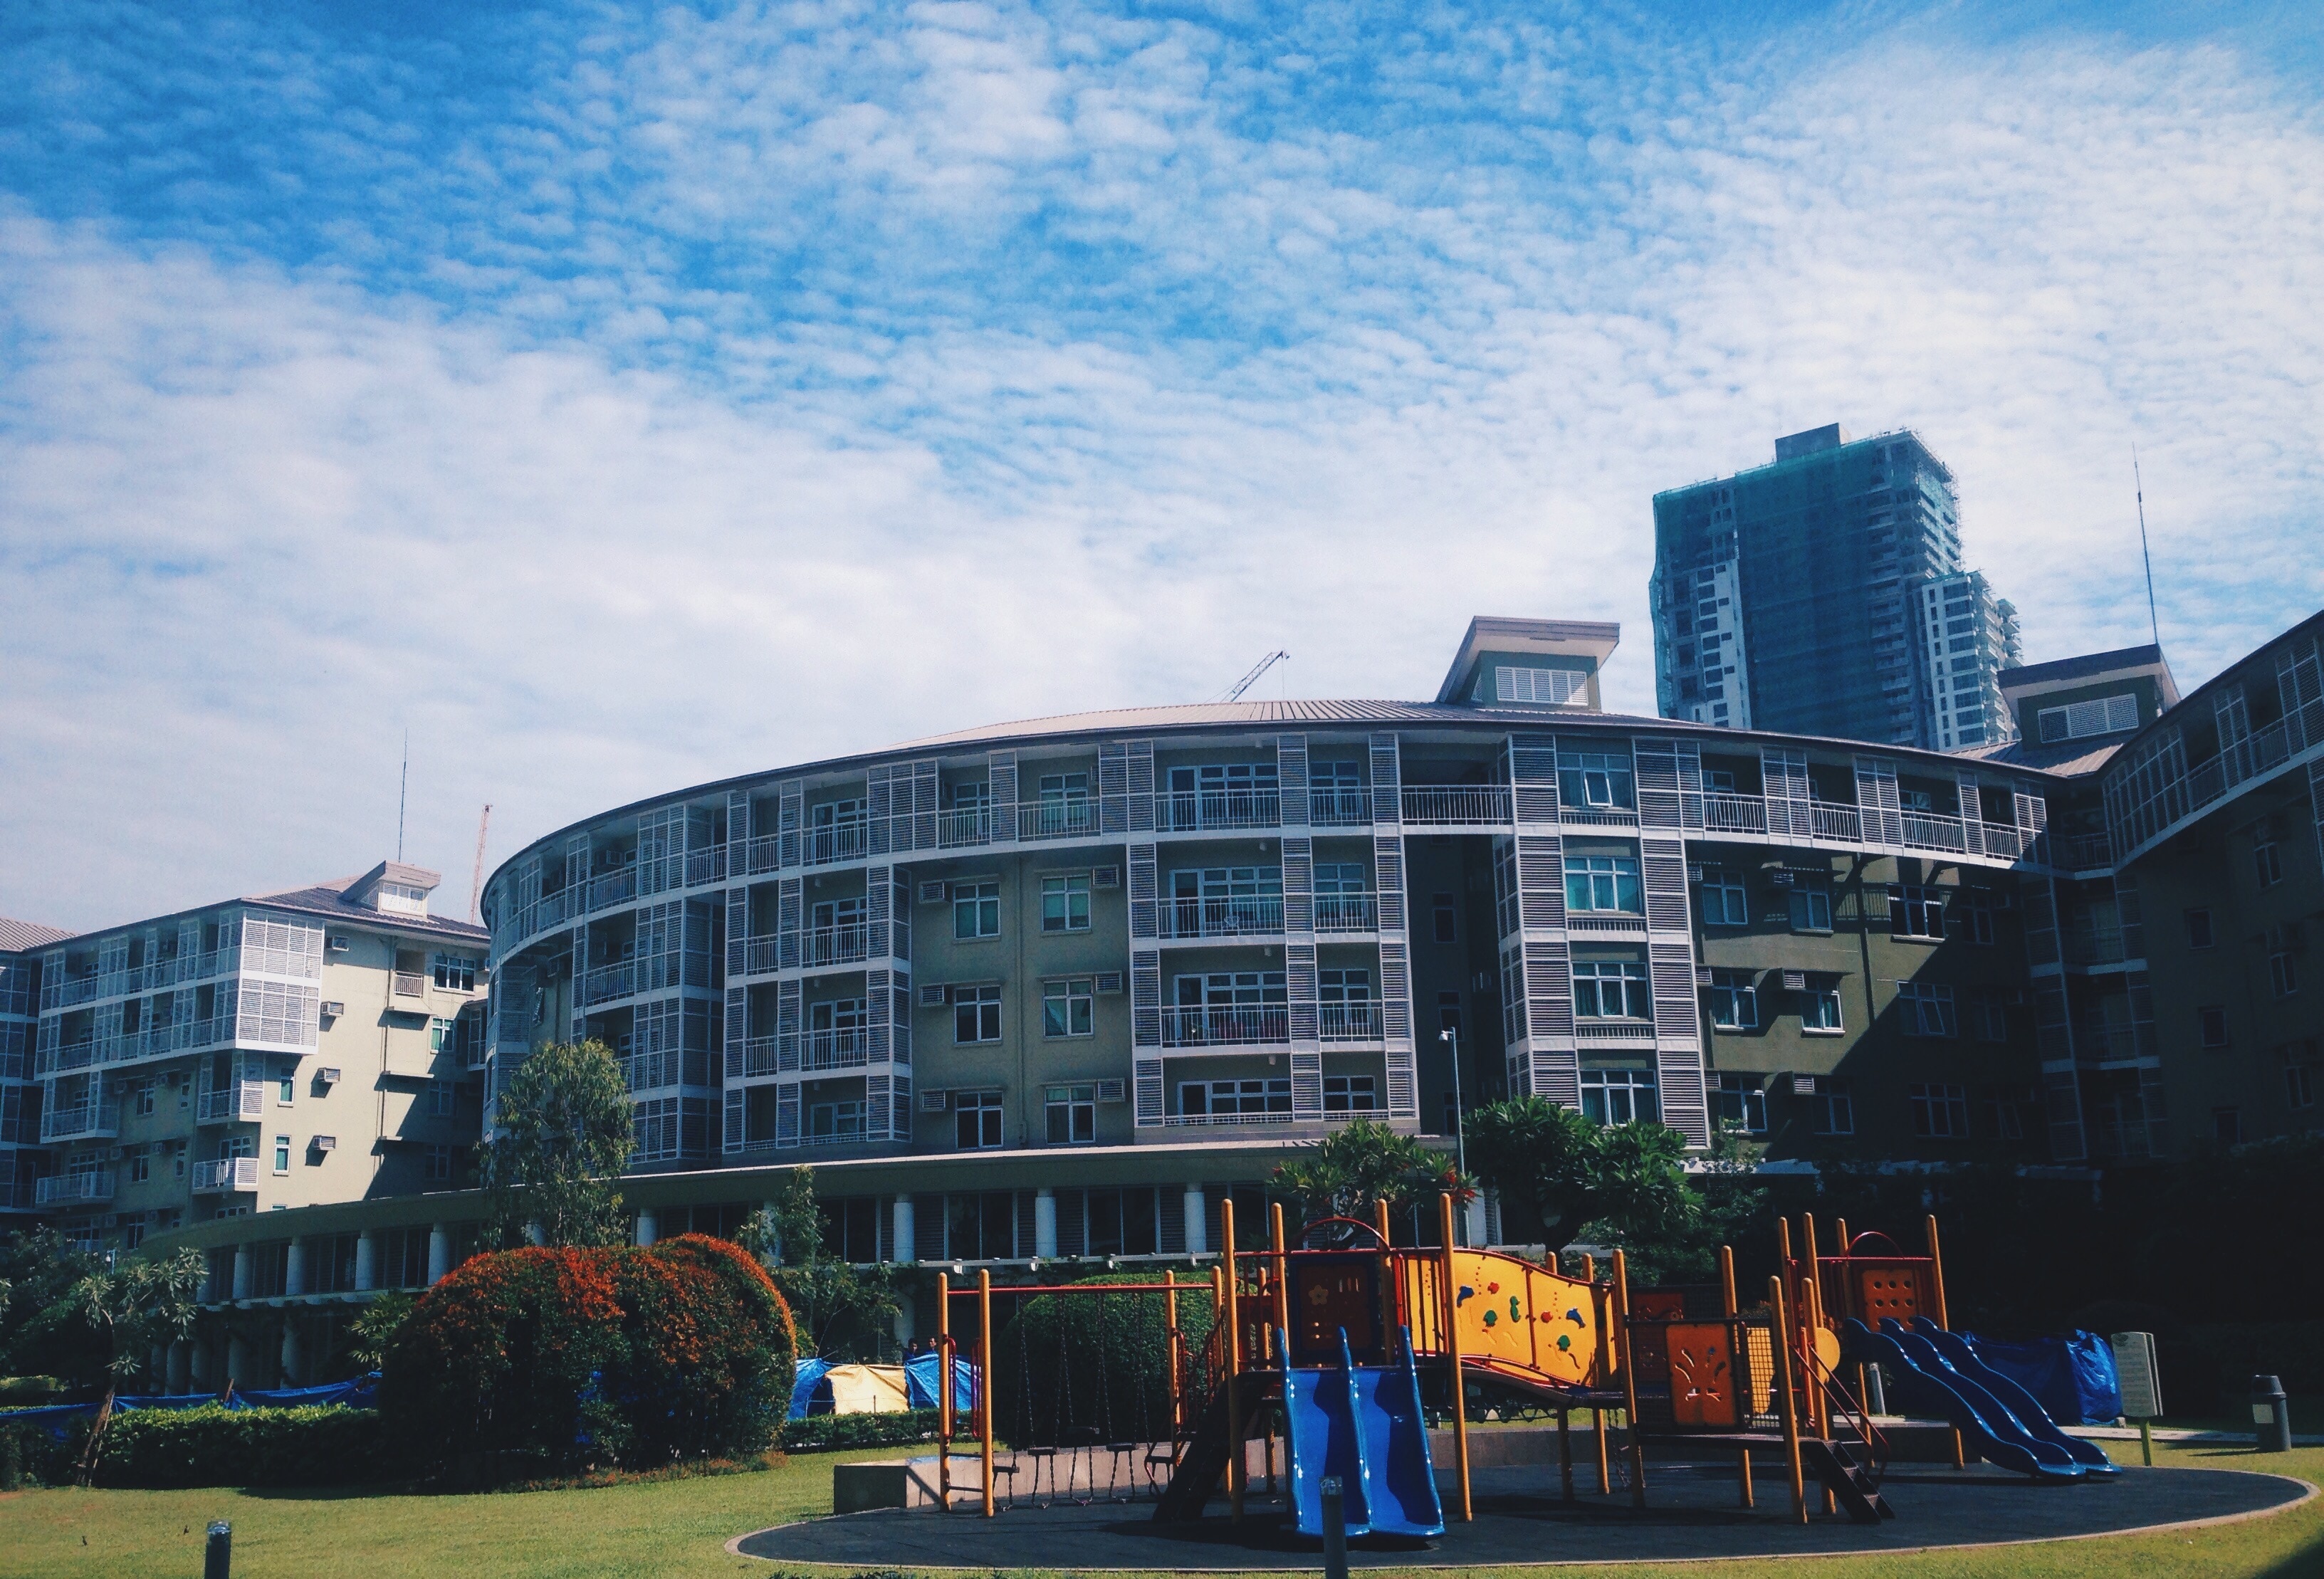 playground in front of building under blue and white sky